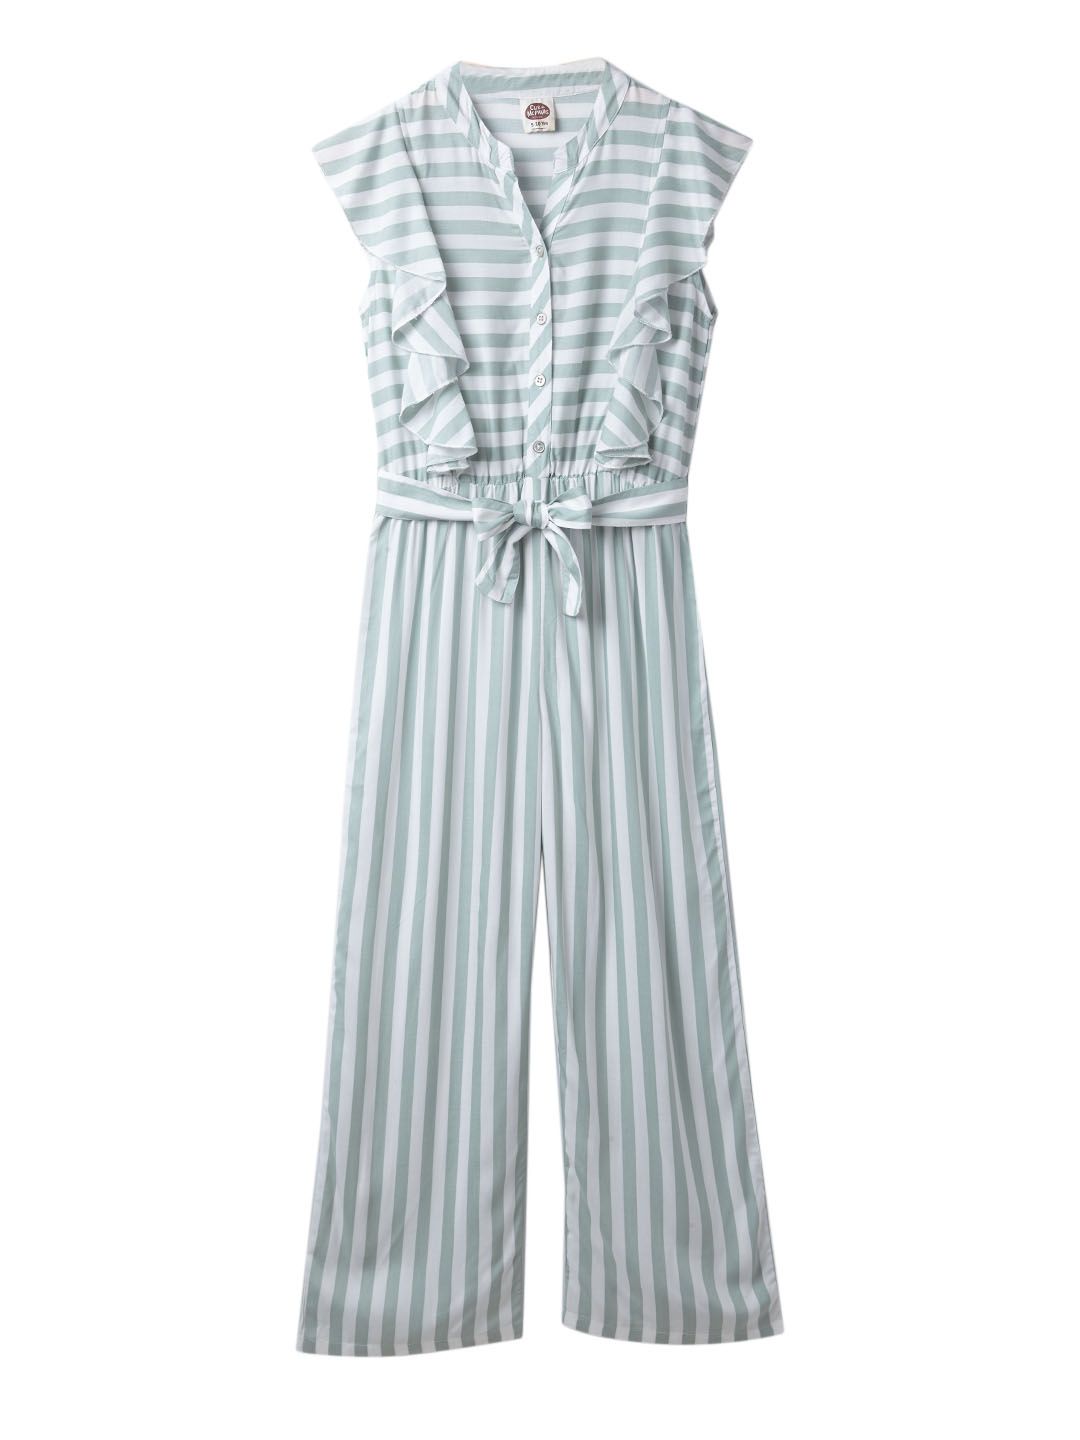 Girls' Jumpsuits | One-and Done Girls' Jumpsuits & Playsuits | Bardot Junior